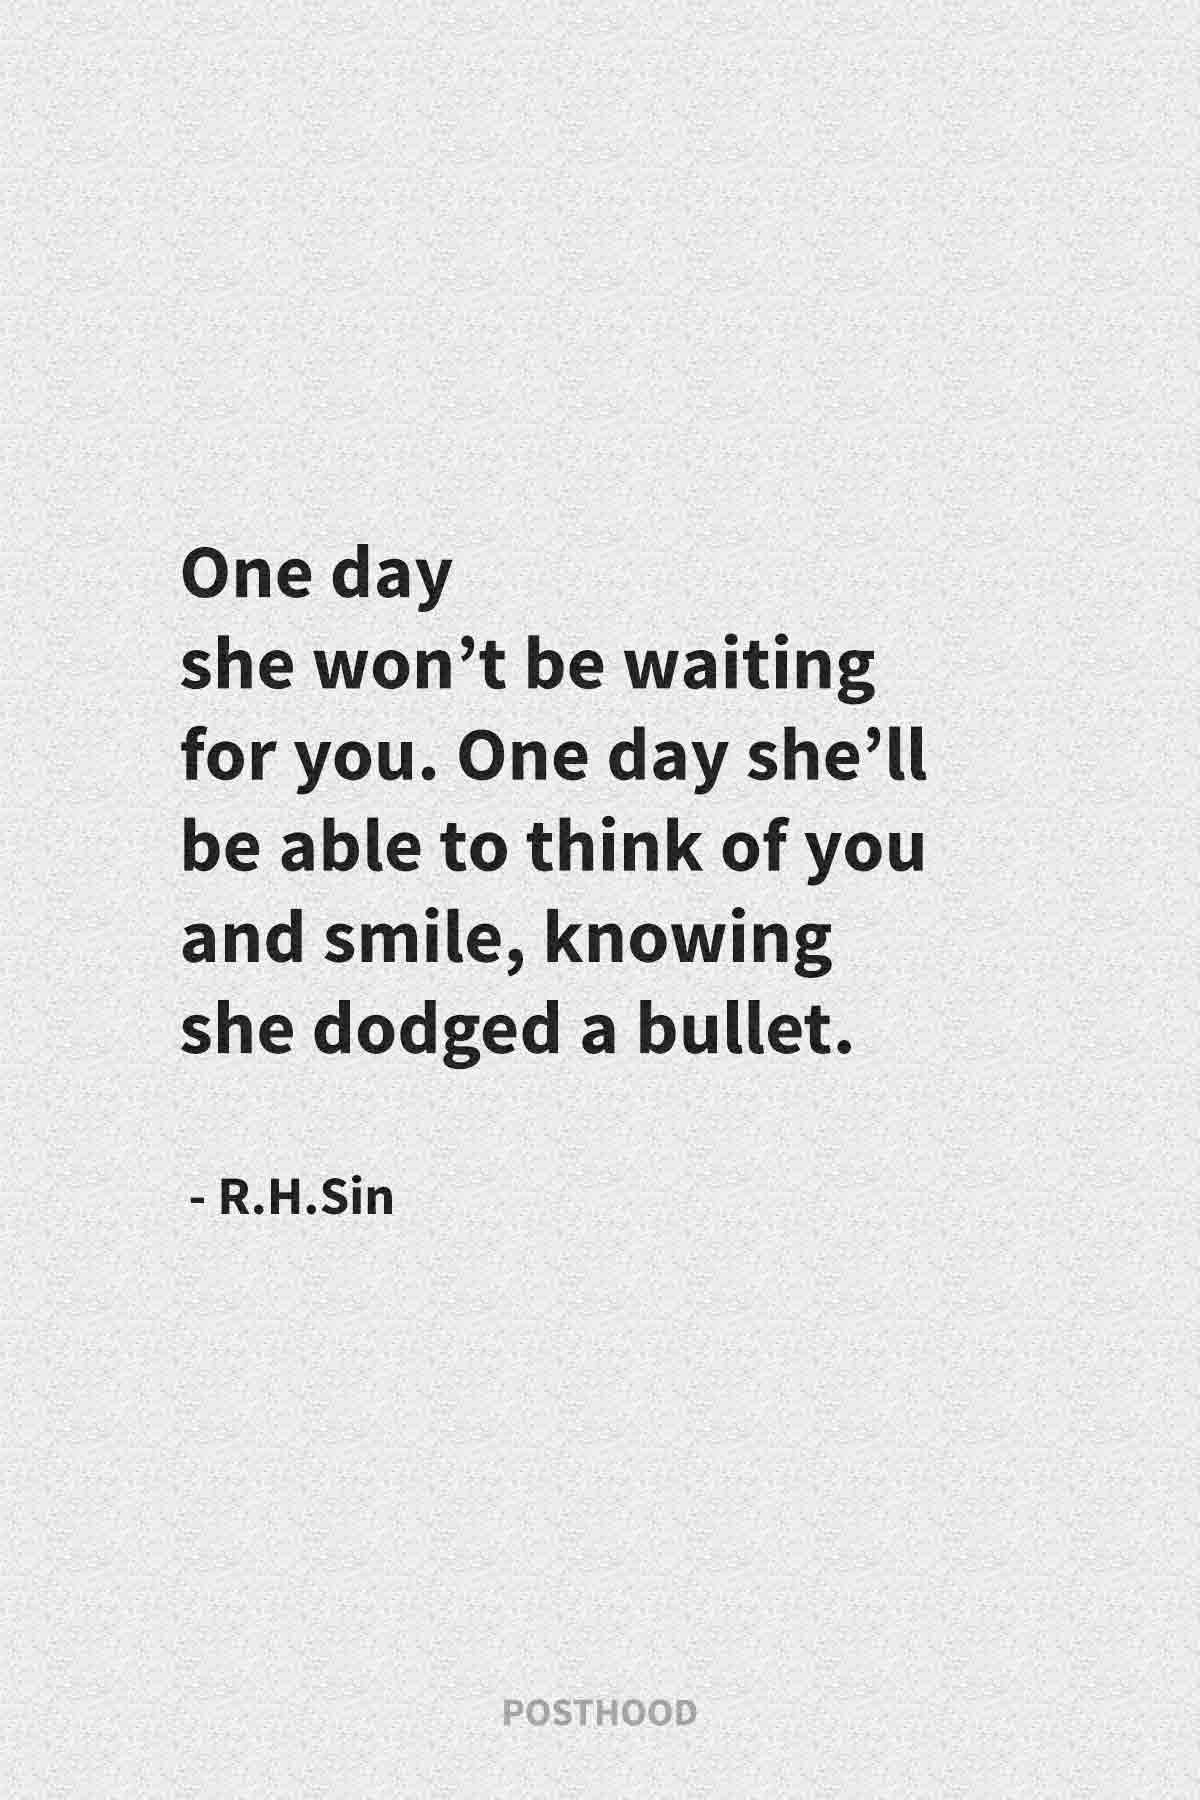 40 powerful badass quotes every woman must read after a heartbreak and leaving a toxic relationship. Best r.h.sin quotes about strong women. 